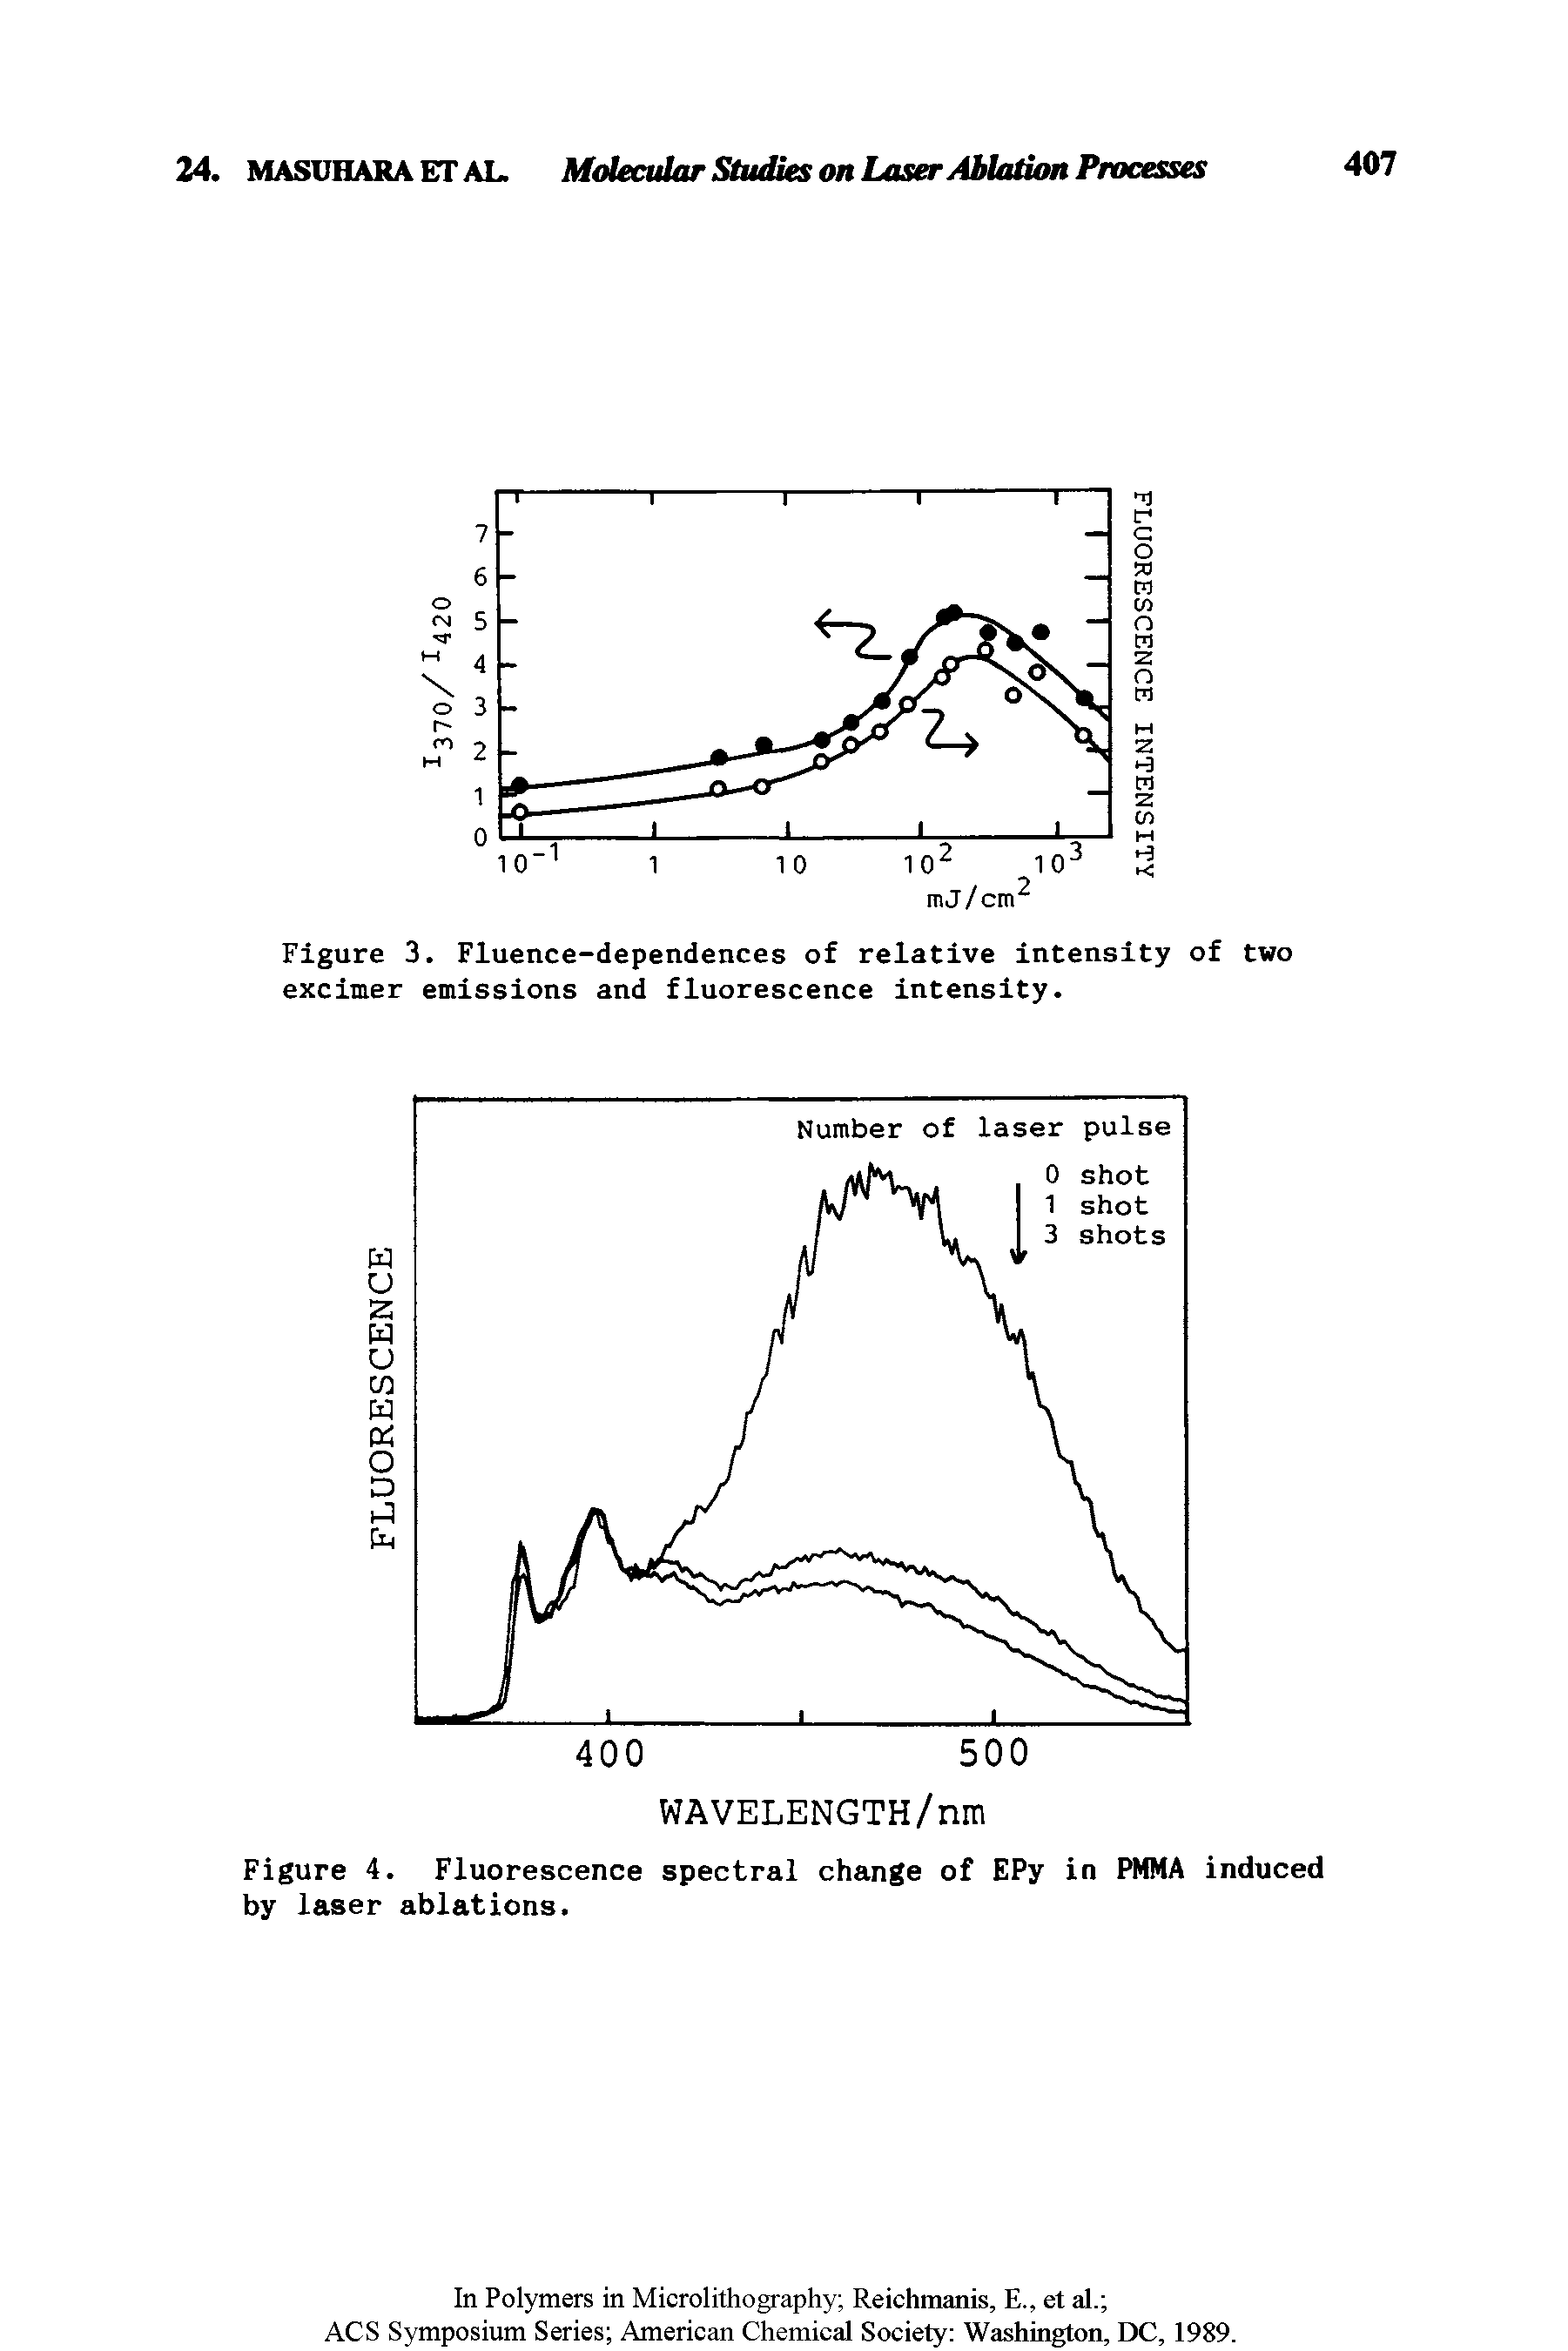 Figure 3. Fluence-dependences of relative intensity of two excimer emissions and fluorescence intensity.